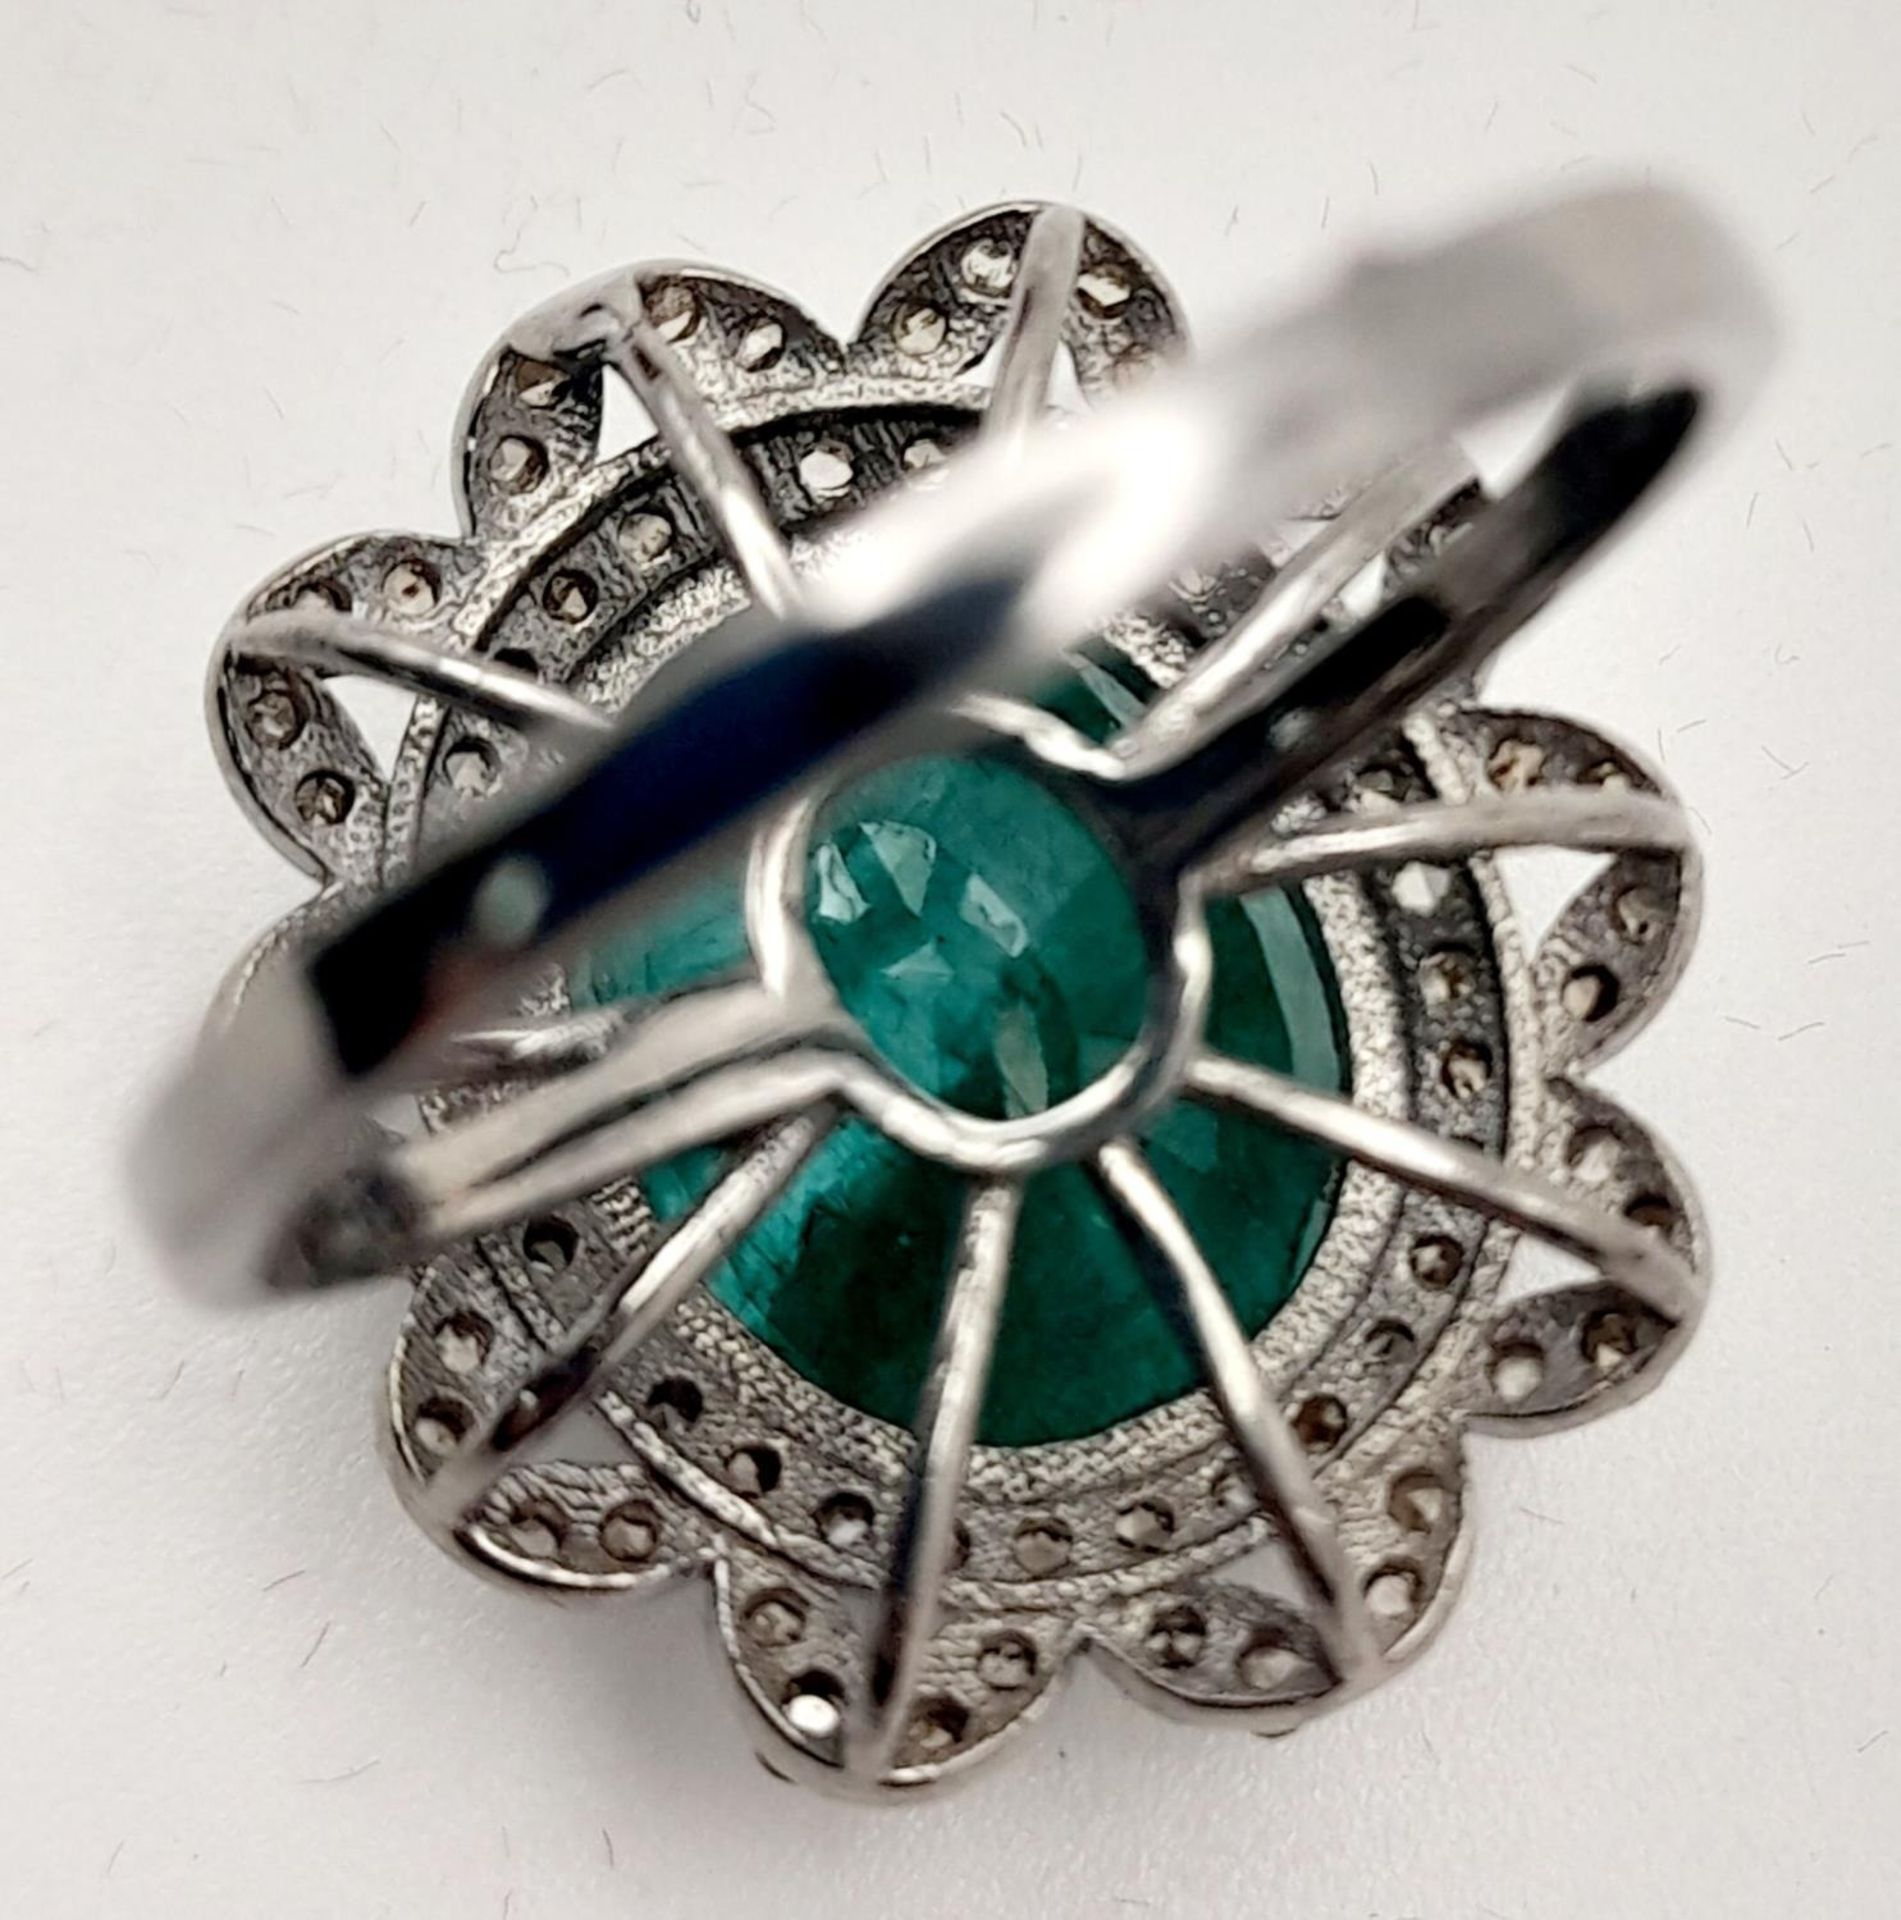 A 6.15ct Emerald Ring with 0.75ctw of Diamond Accents. Set in 925 Silver. Size N. Comes with a - Image 5 of 6